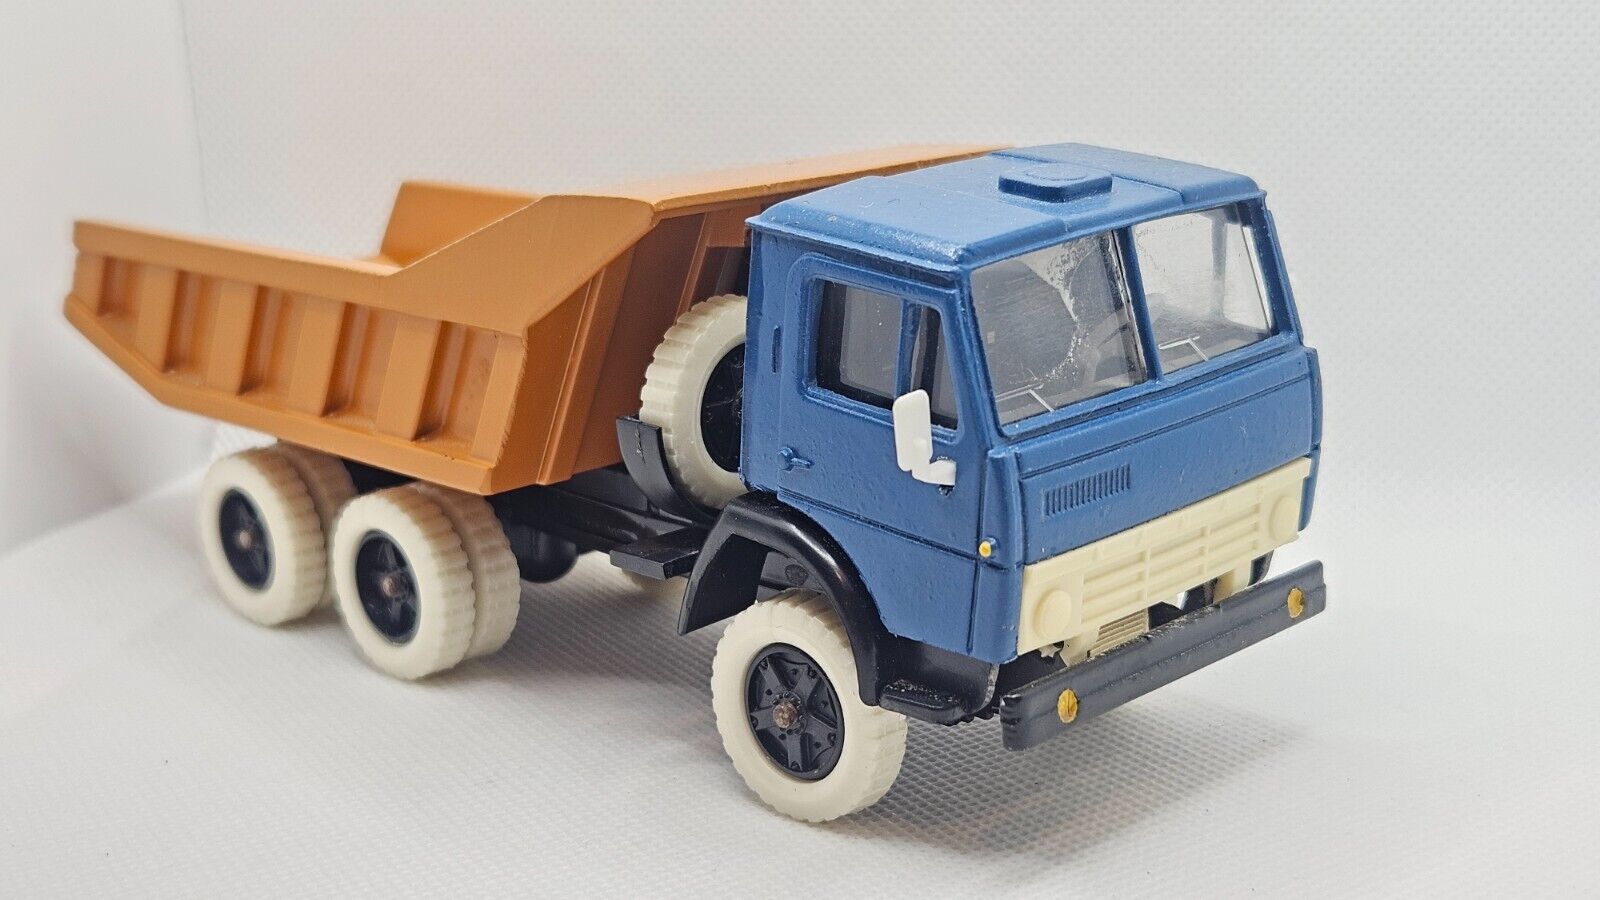 KAMAZ 5511 USSR 1:43 1/43 early model with rare white tires